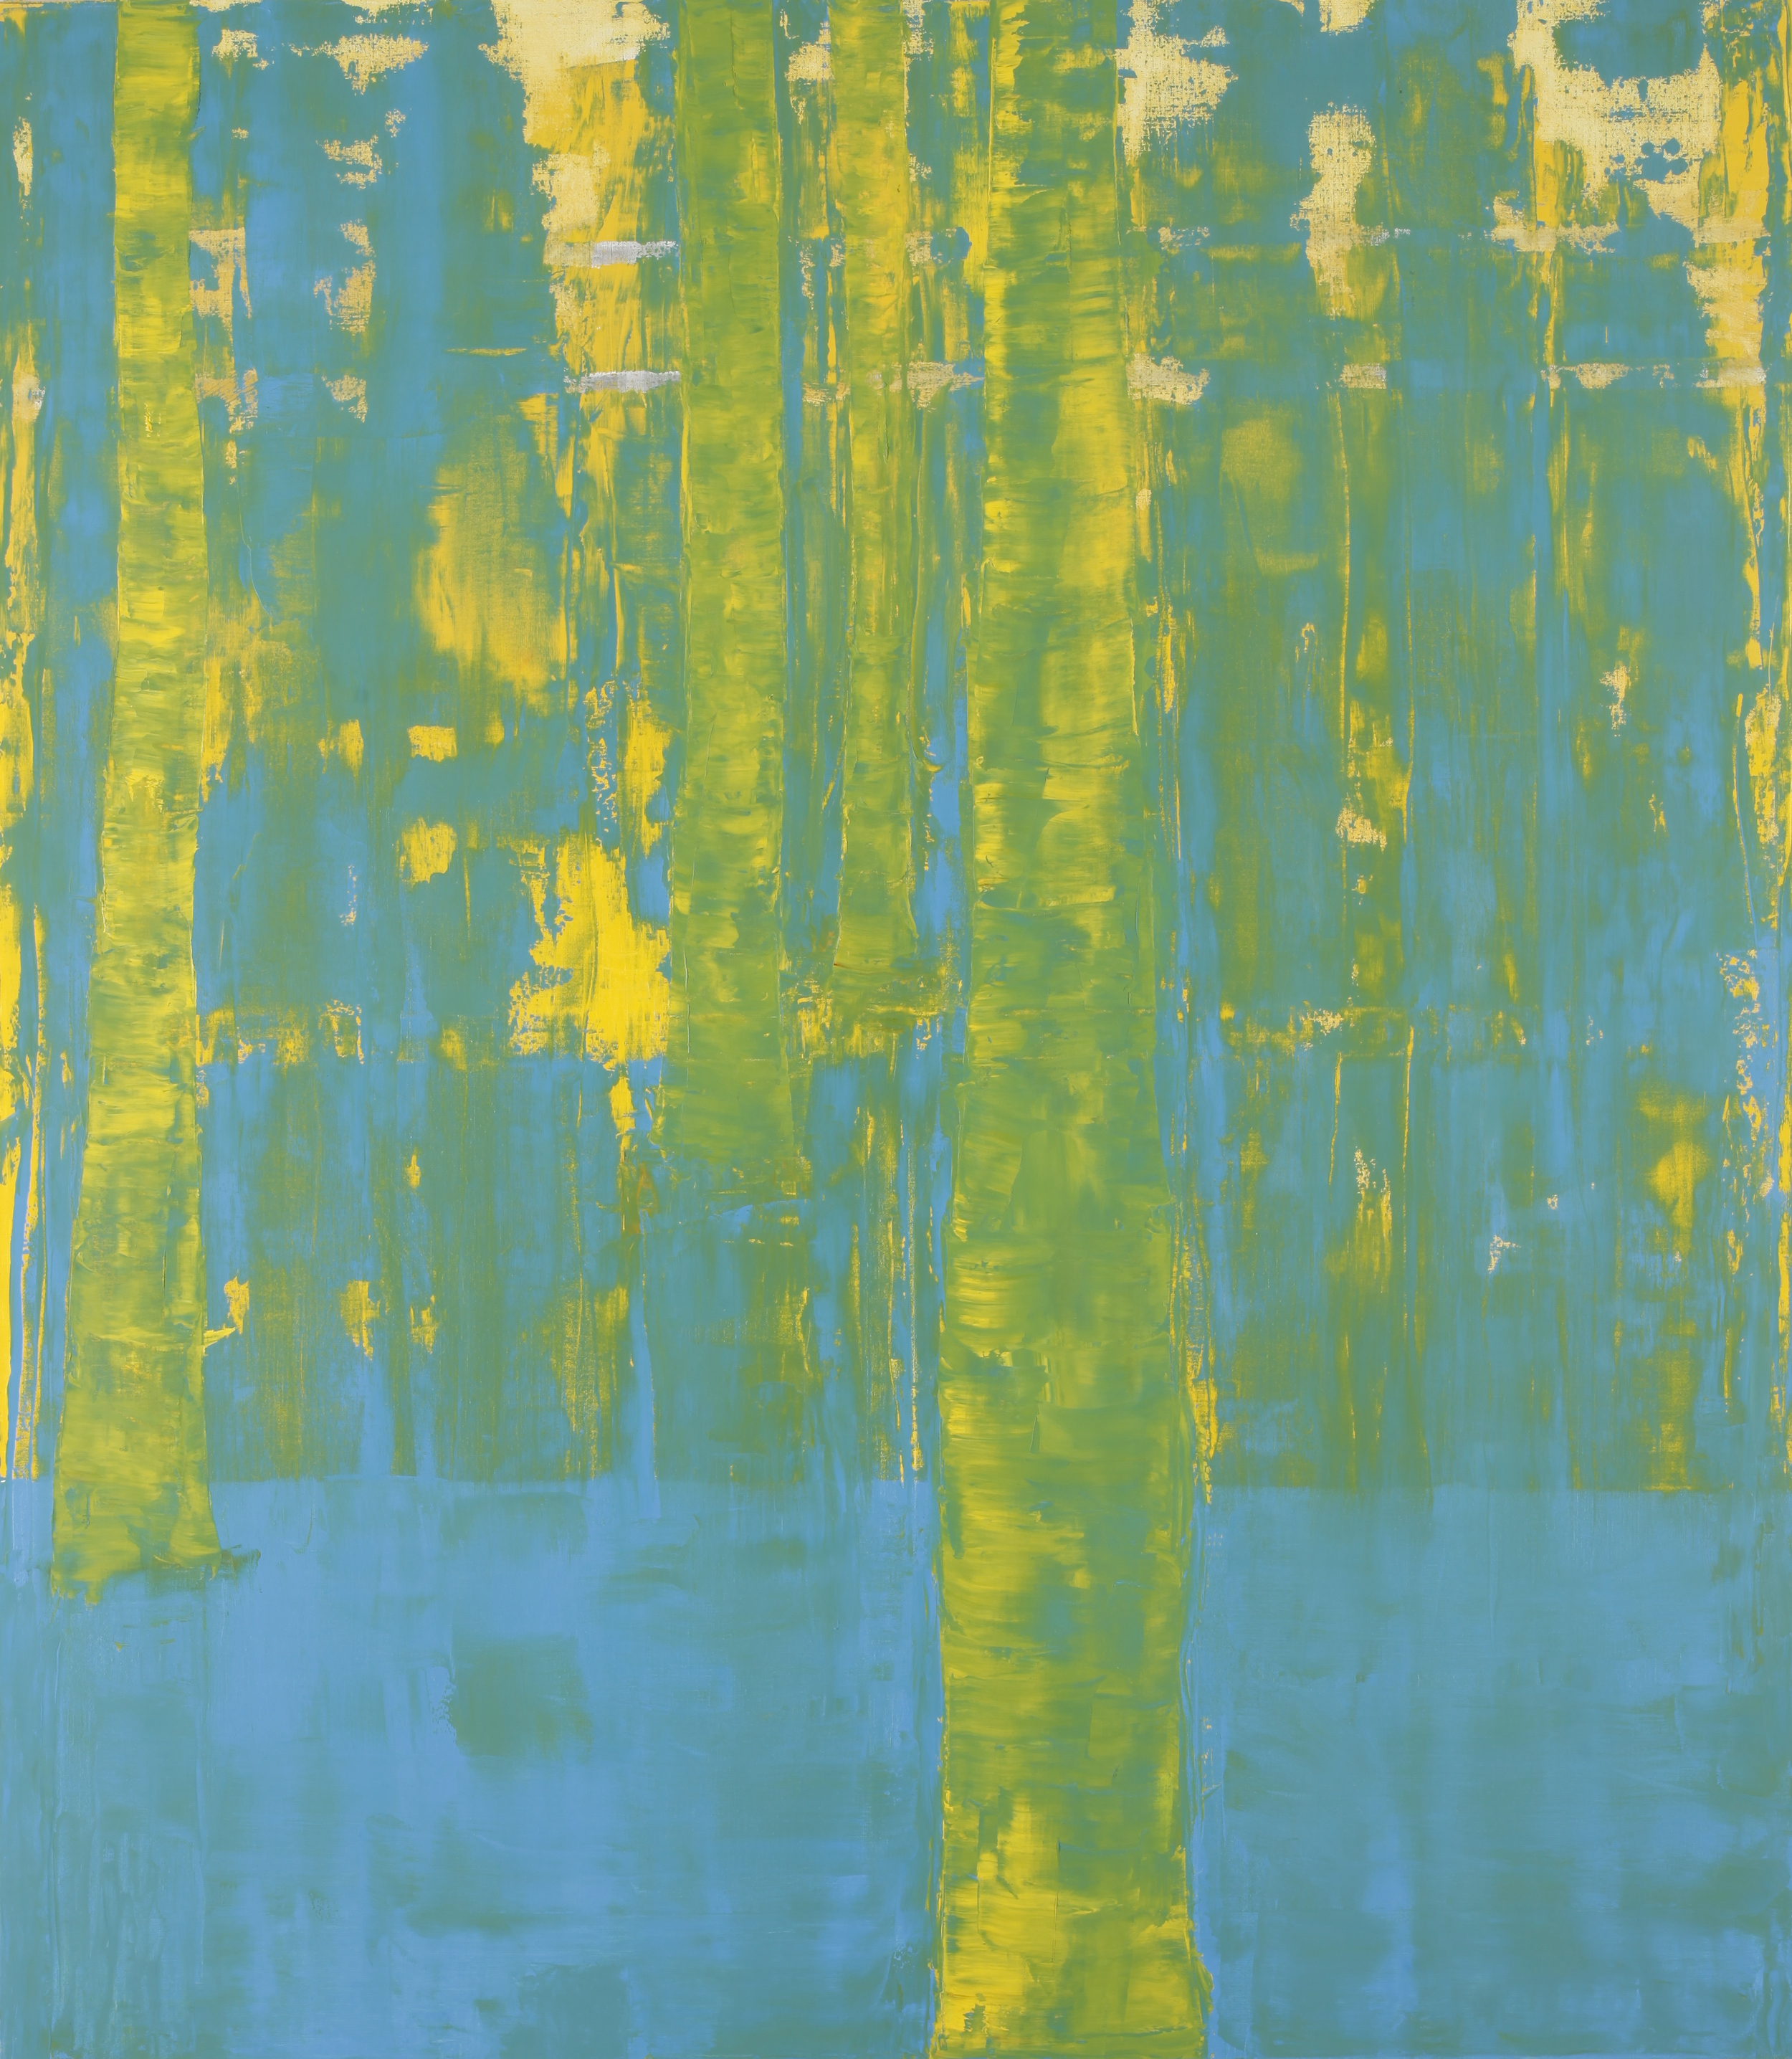 Flooded Woods, 2012, oil on canvas, 176x154cm